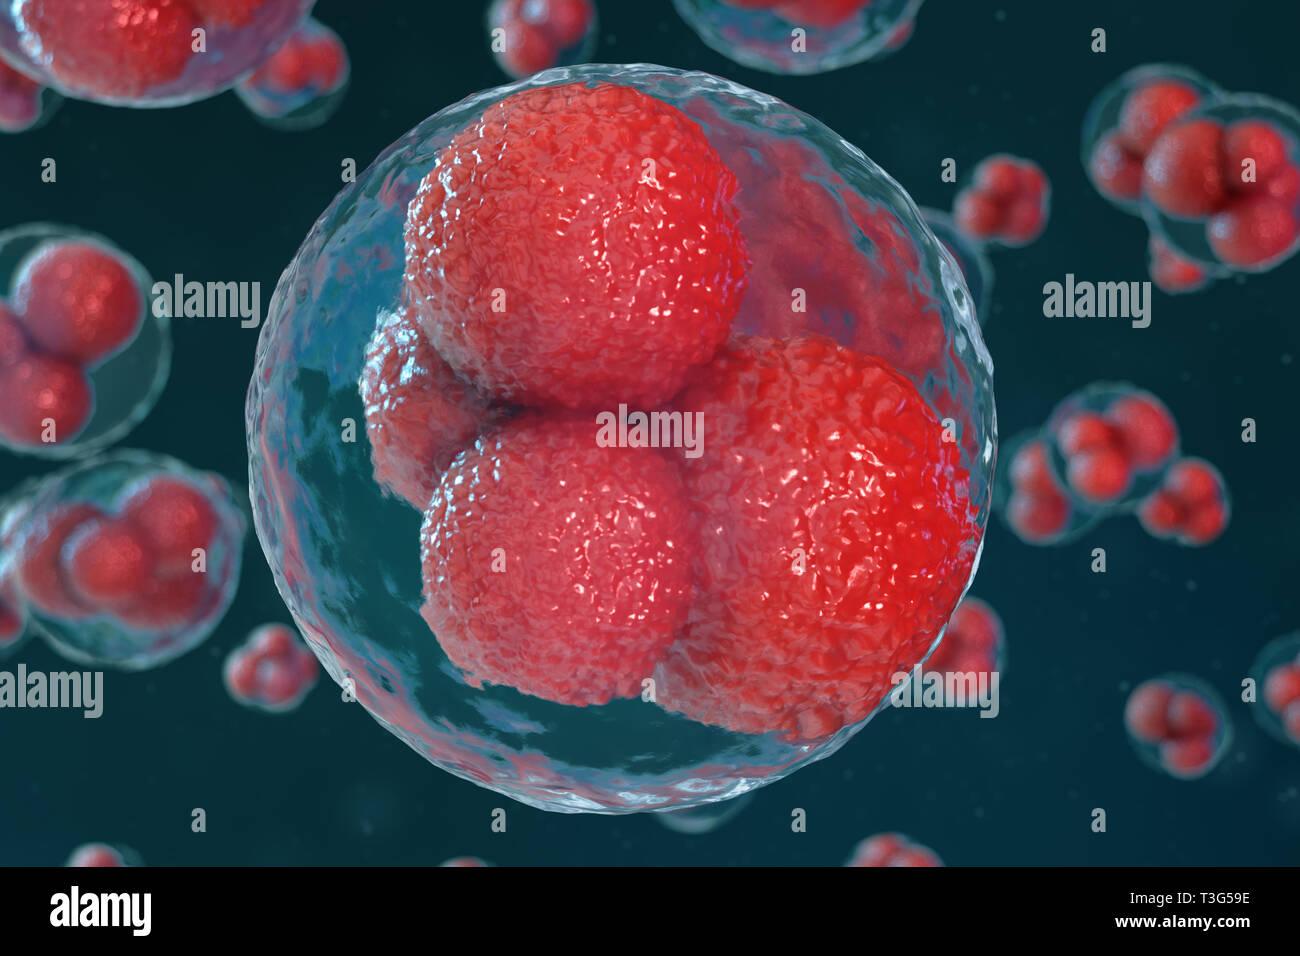 3D illustration egg cells embryo. Embryo cells with red nucleuses in center. Human or animal egg cells. Medicine scientific concept. Development livin Stock Photo